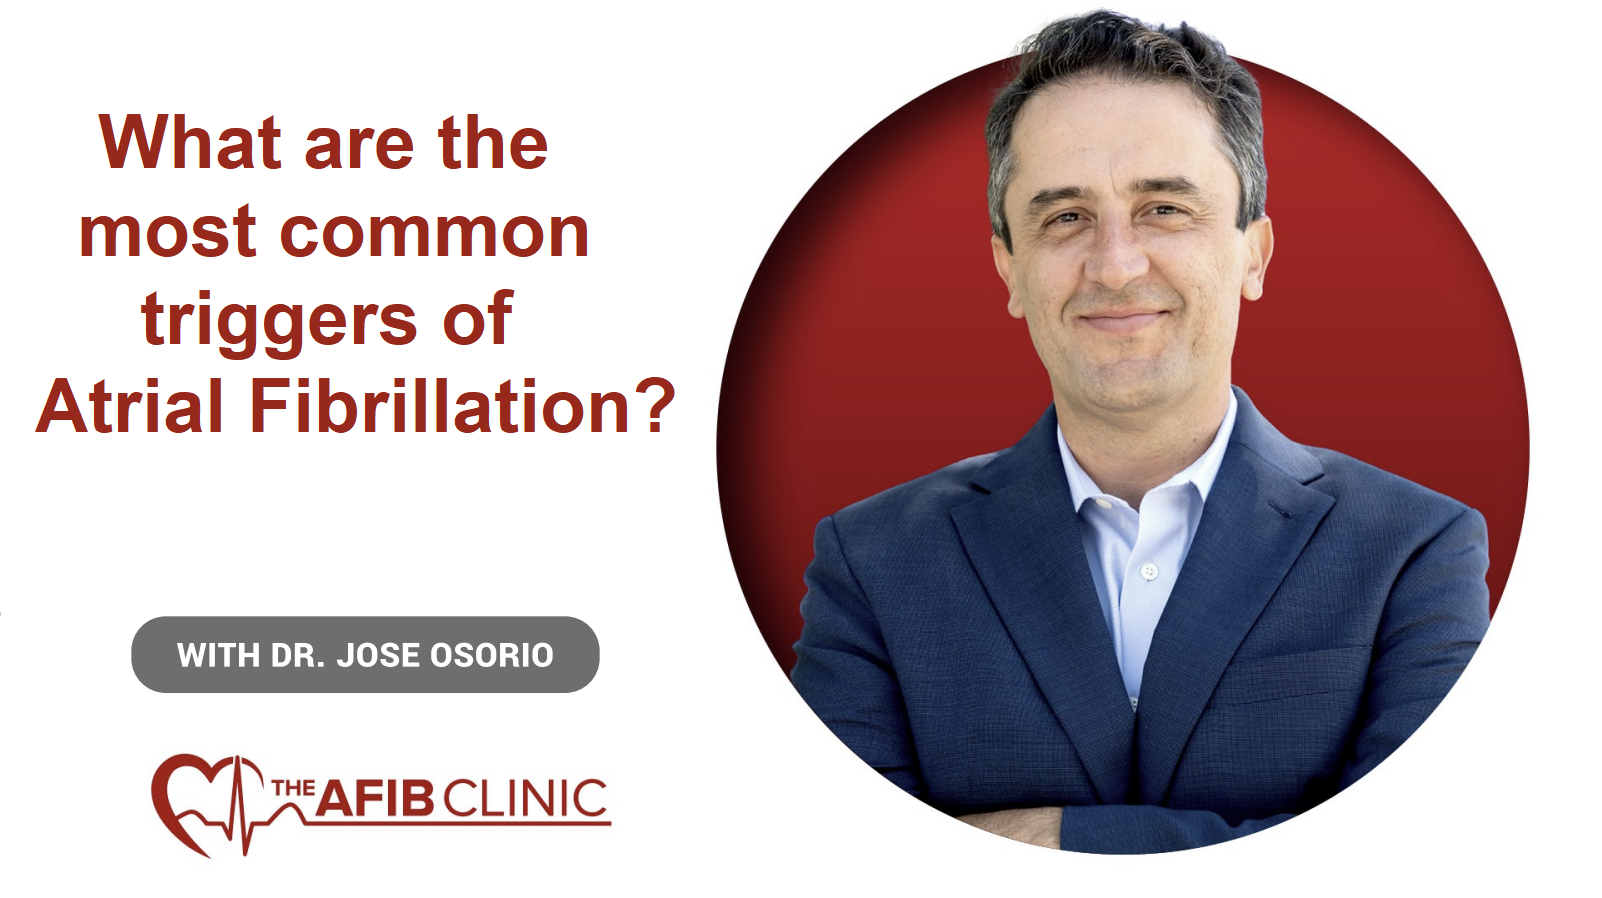 What are the most common triggers of Atrial Fibrillation?